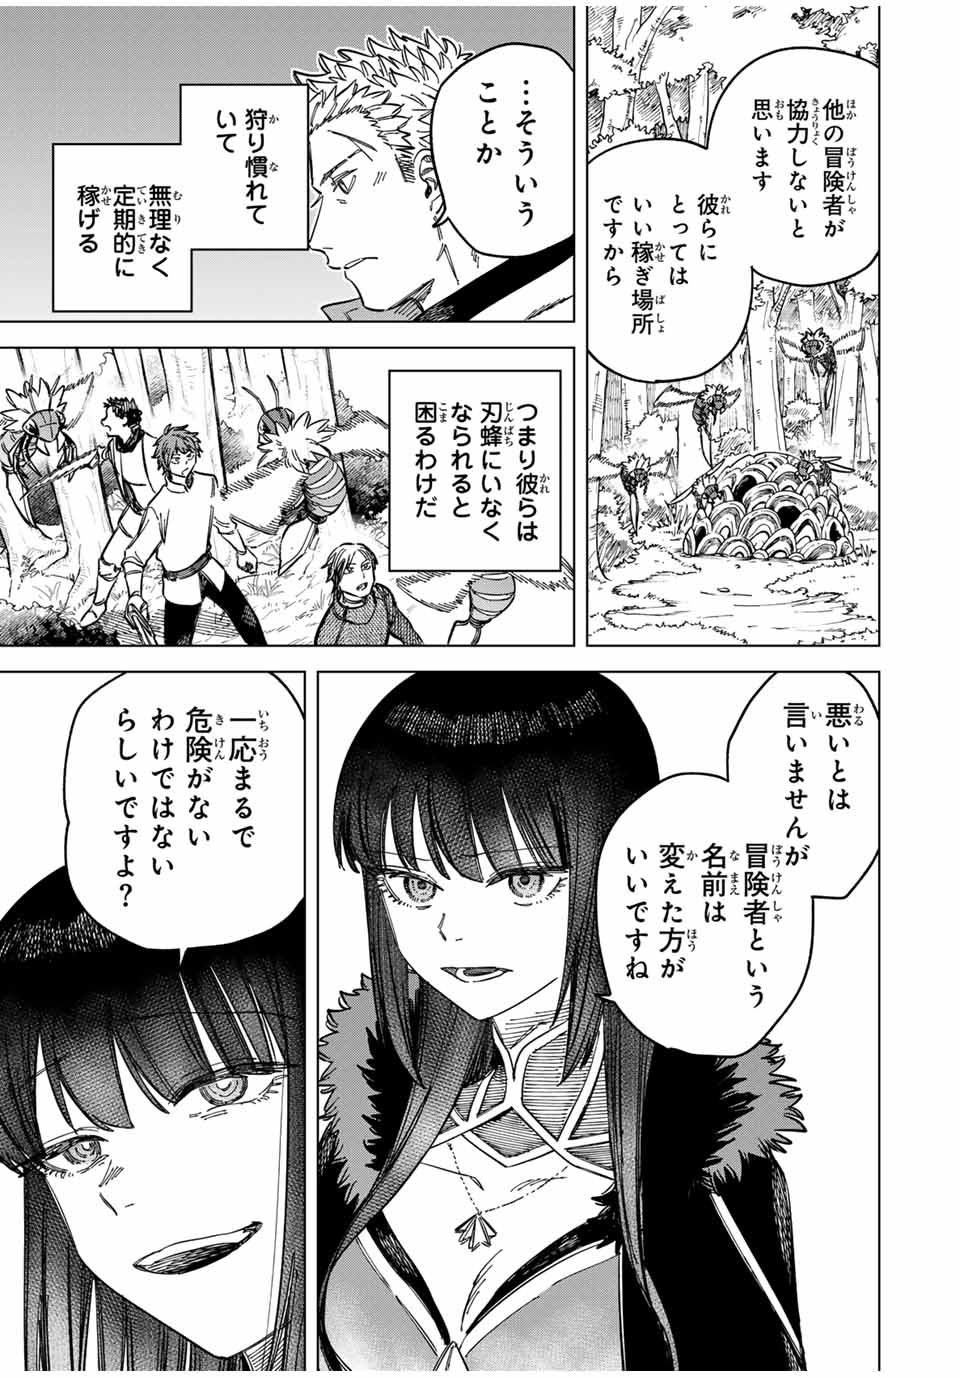 Witch and Mercenary 魔女と傭兵 第9.1話 - Page 3